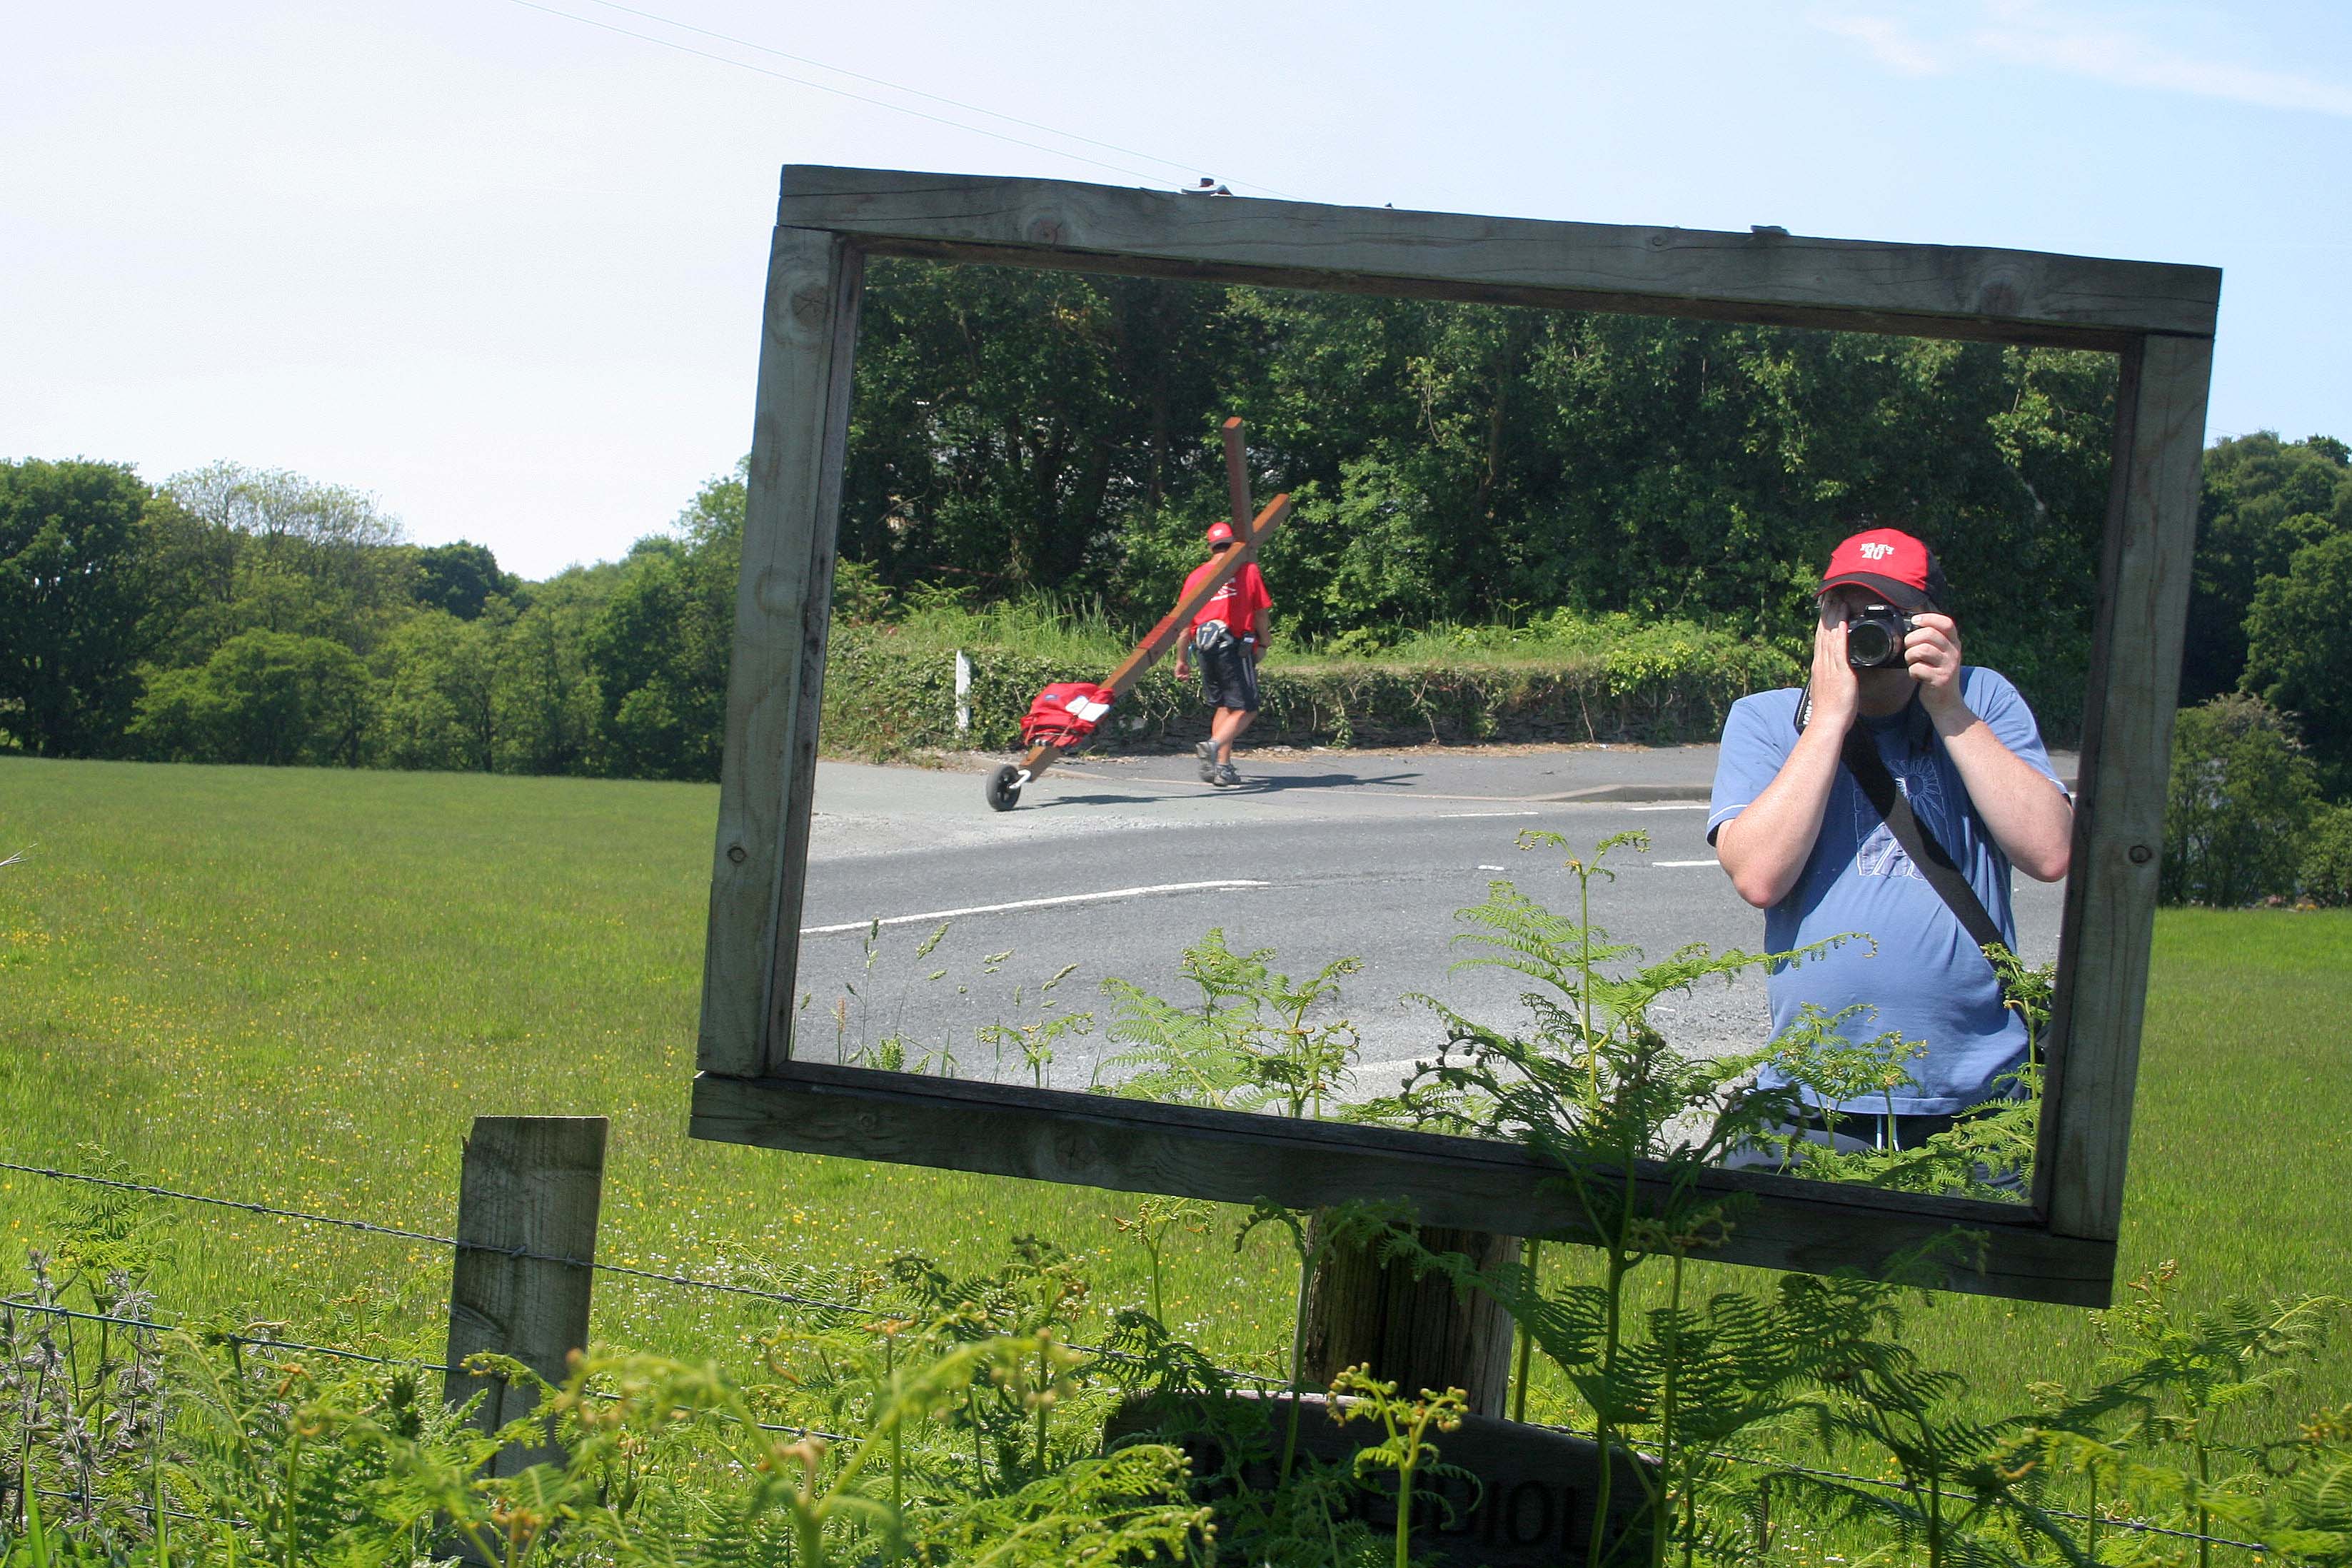 Counties evangelist Clive Cornish captured walking his cross in a roadside mirror - somewhere in mid-Wales